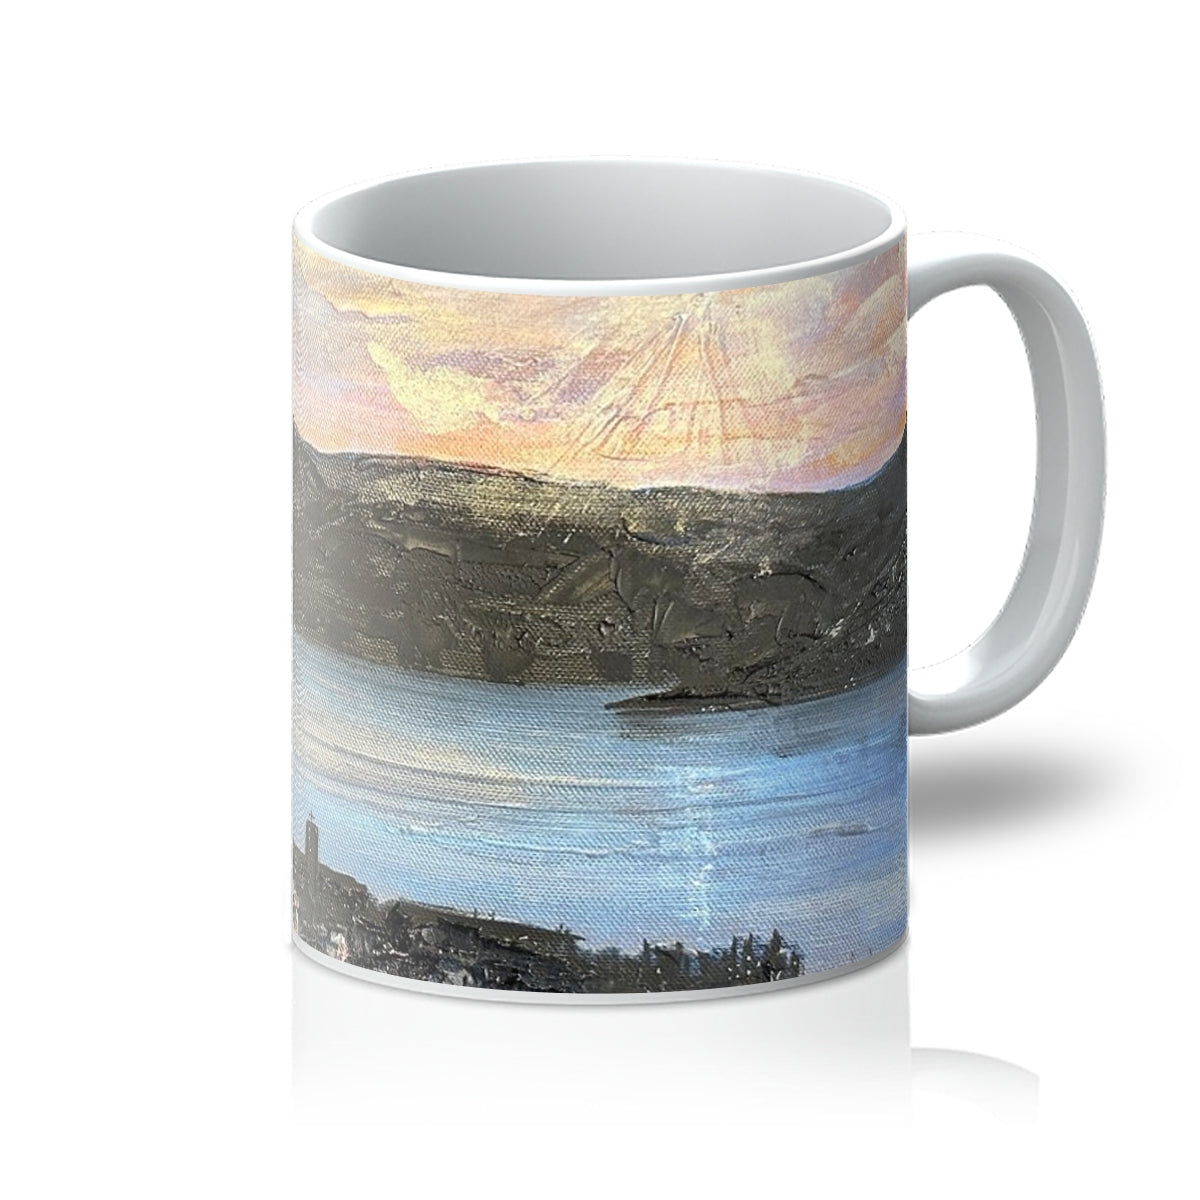 From Lyle Hill Art Gifts Mug-Mugs-River Clyde Art Gallery-11oz-White-Paintings, Prints, Homeware, Art Gifts From Scotland By Scottish Artist Kevin Hunter